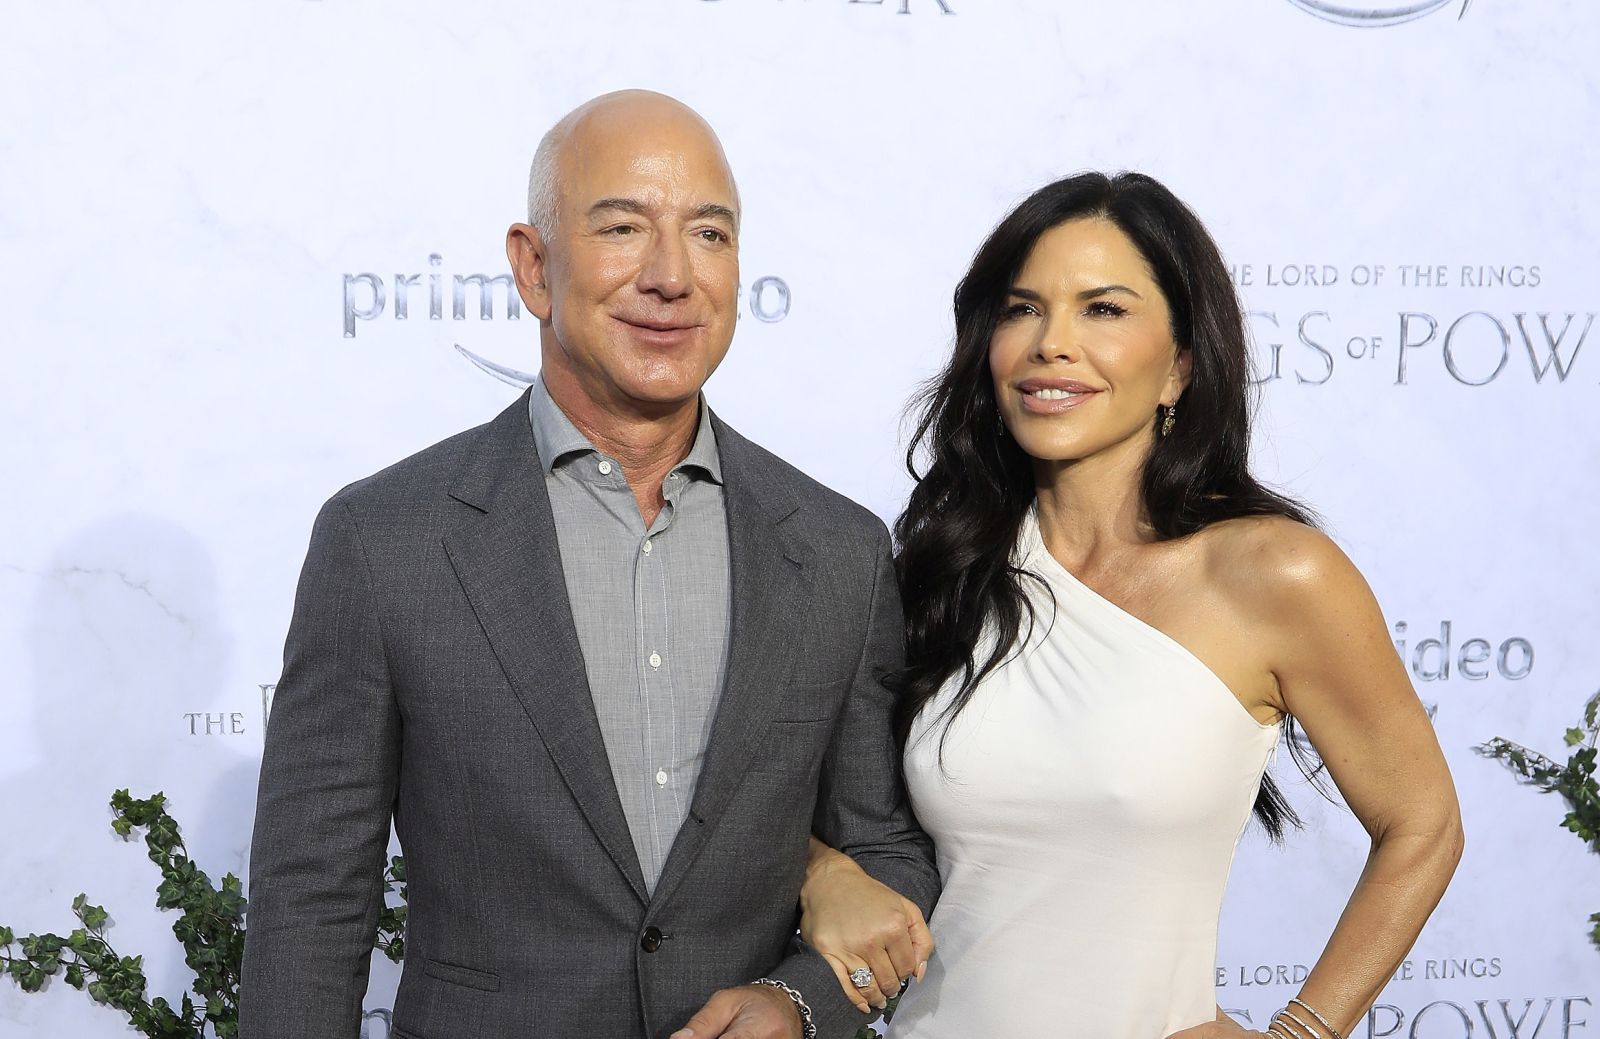 epa10123977 Jeff Bezos (L) and Lauren Sanchez pose at the Los Angeles premiere of the Amazon Prime Video 'The Lord of The Rings: The Rings of Power' at The Culver Studios in Culver City, Los Angeles County, California, USA, 15 August 2022 (issued 16 August 2022). The series will be released via the internet worldwide on 02 September 2022.  EPA/NINA PROMMER